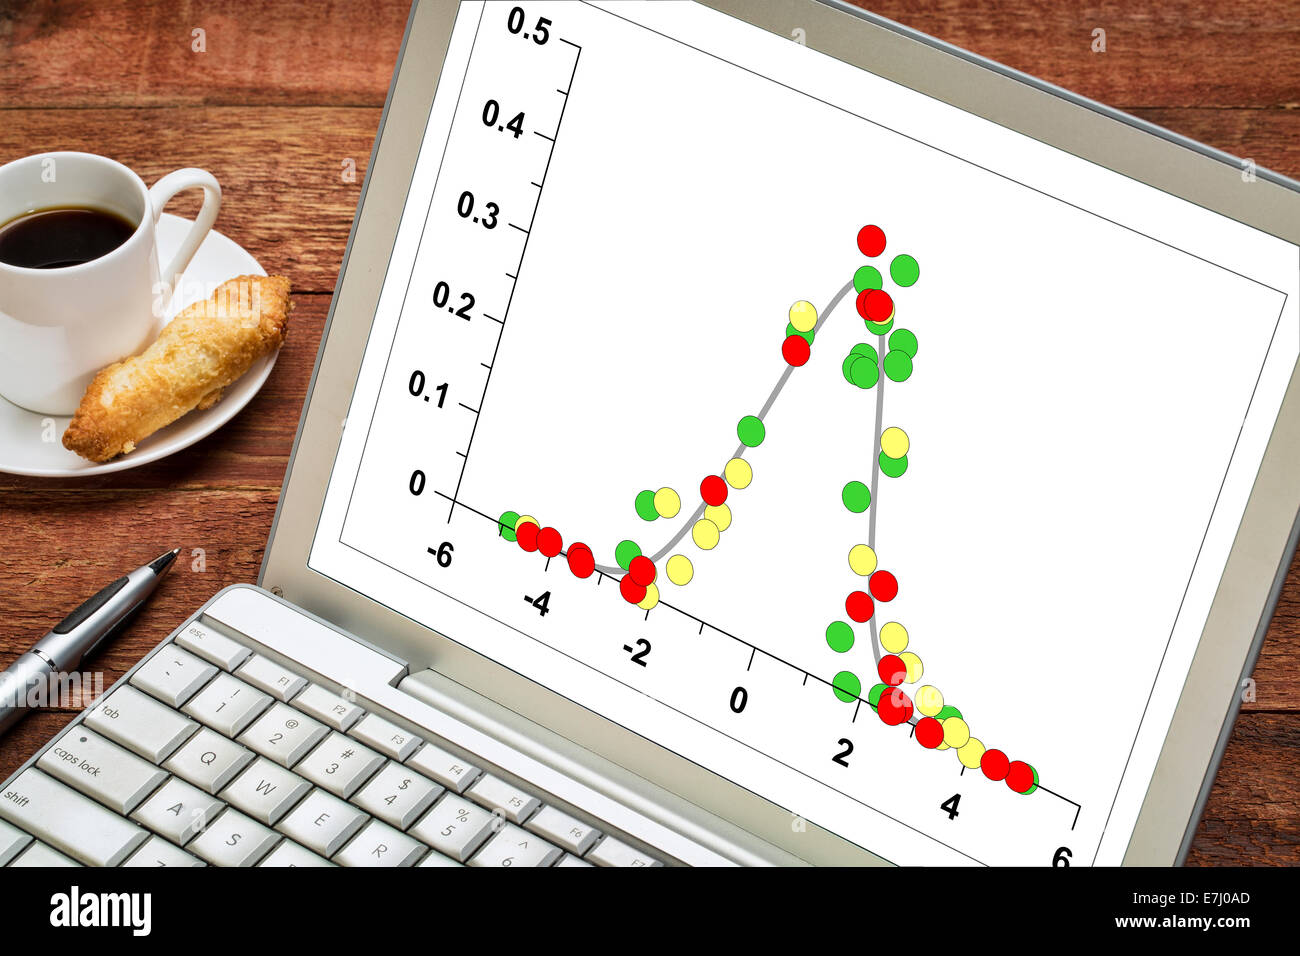 graph of data following Gaussian distribution (bell curve) on a laptop with a cup of coffee Stock Photo